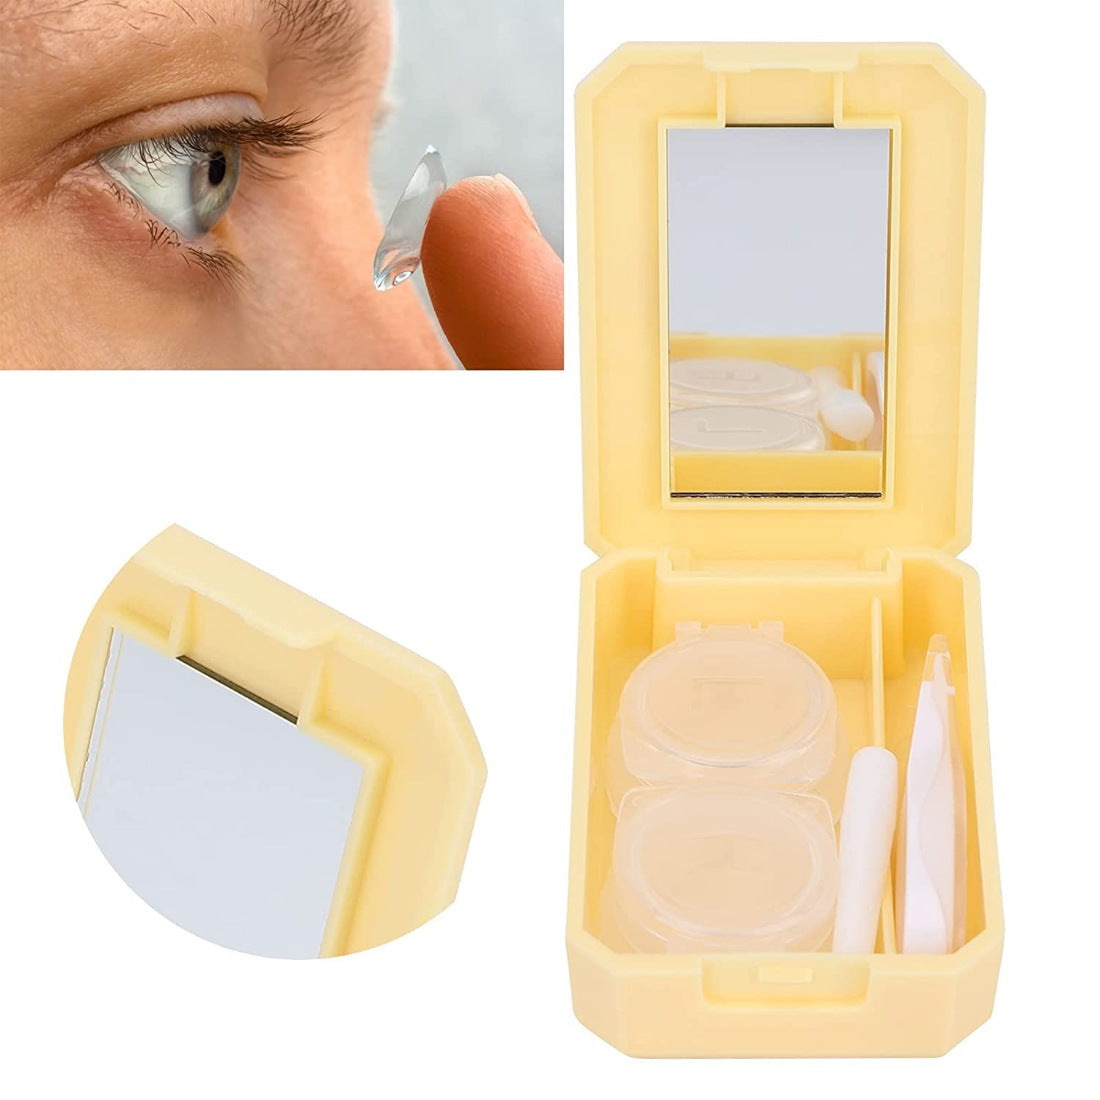 Generic Pack Of_2 Container Soak Storage Kit, Practical Contact Lens Box with Mirror for Travel for Home for Business Trip (Assorted)